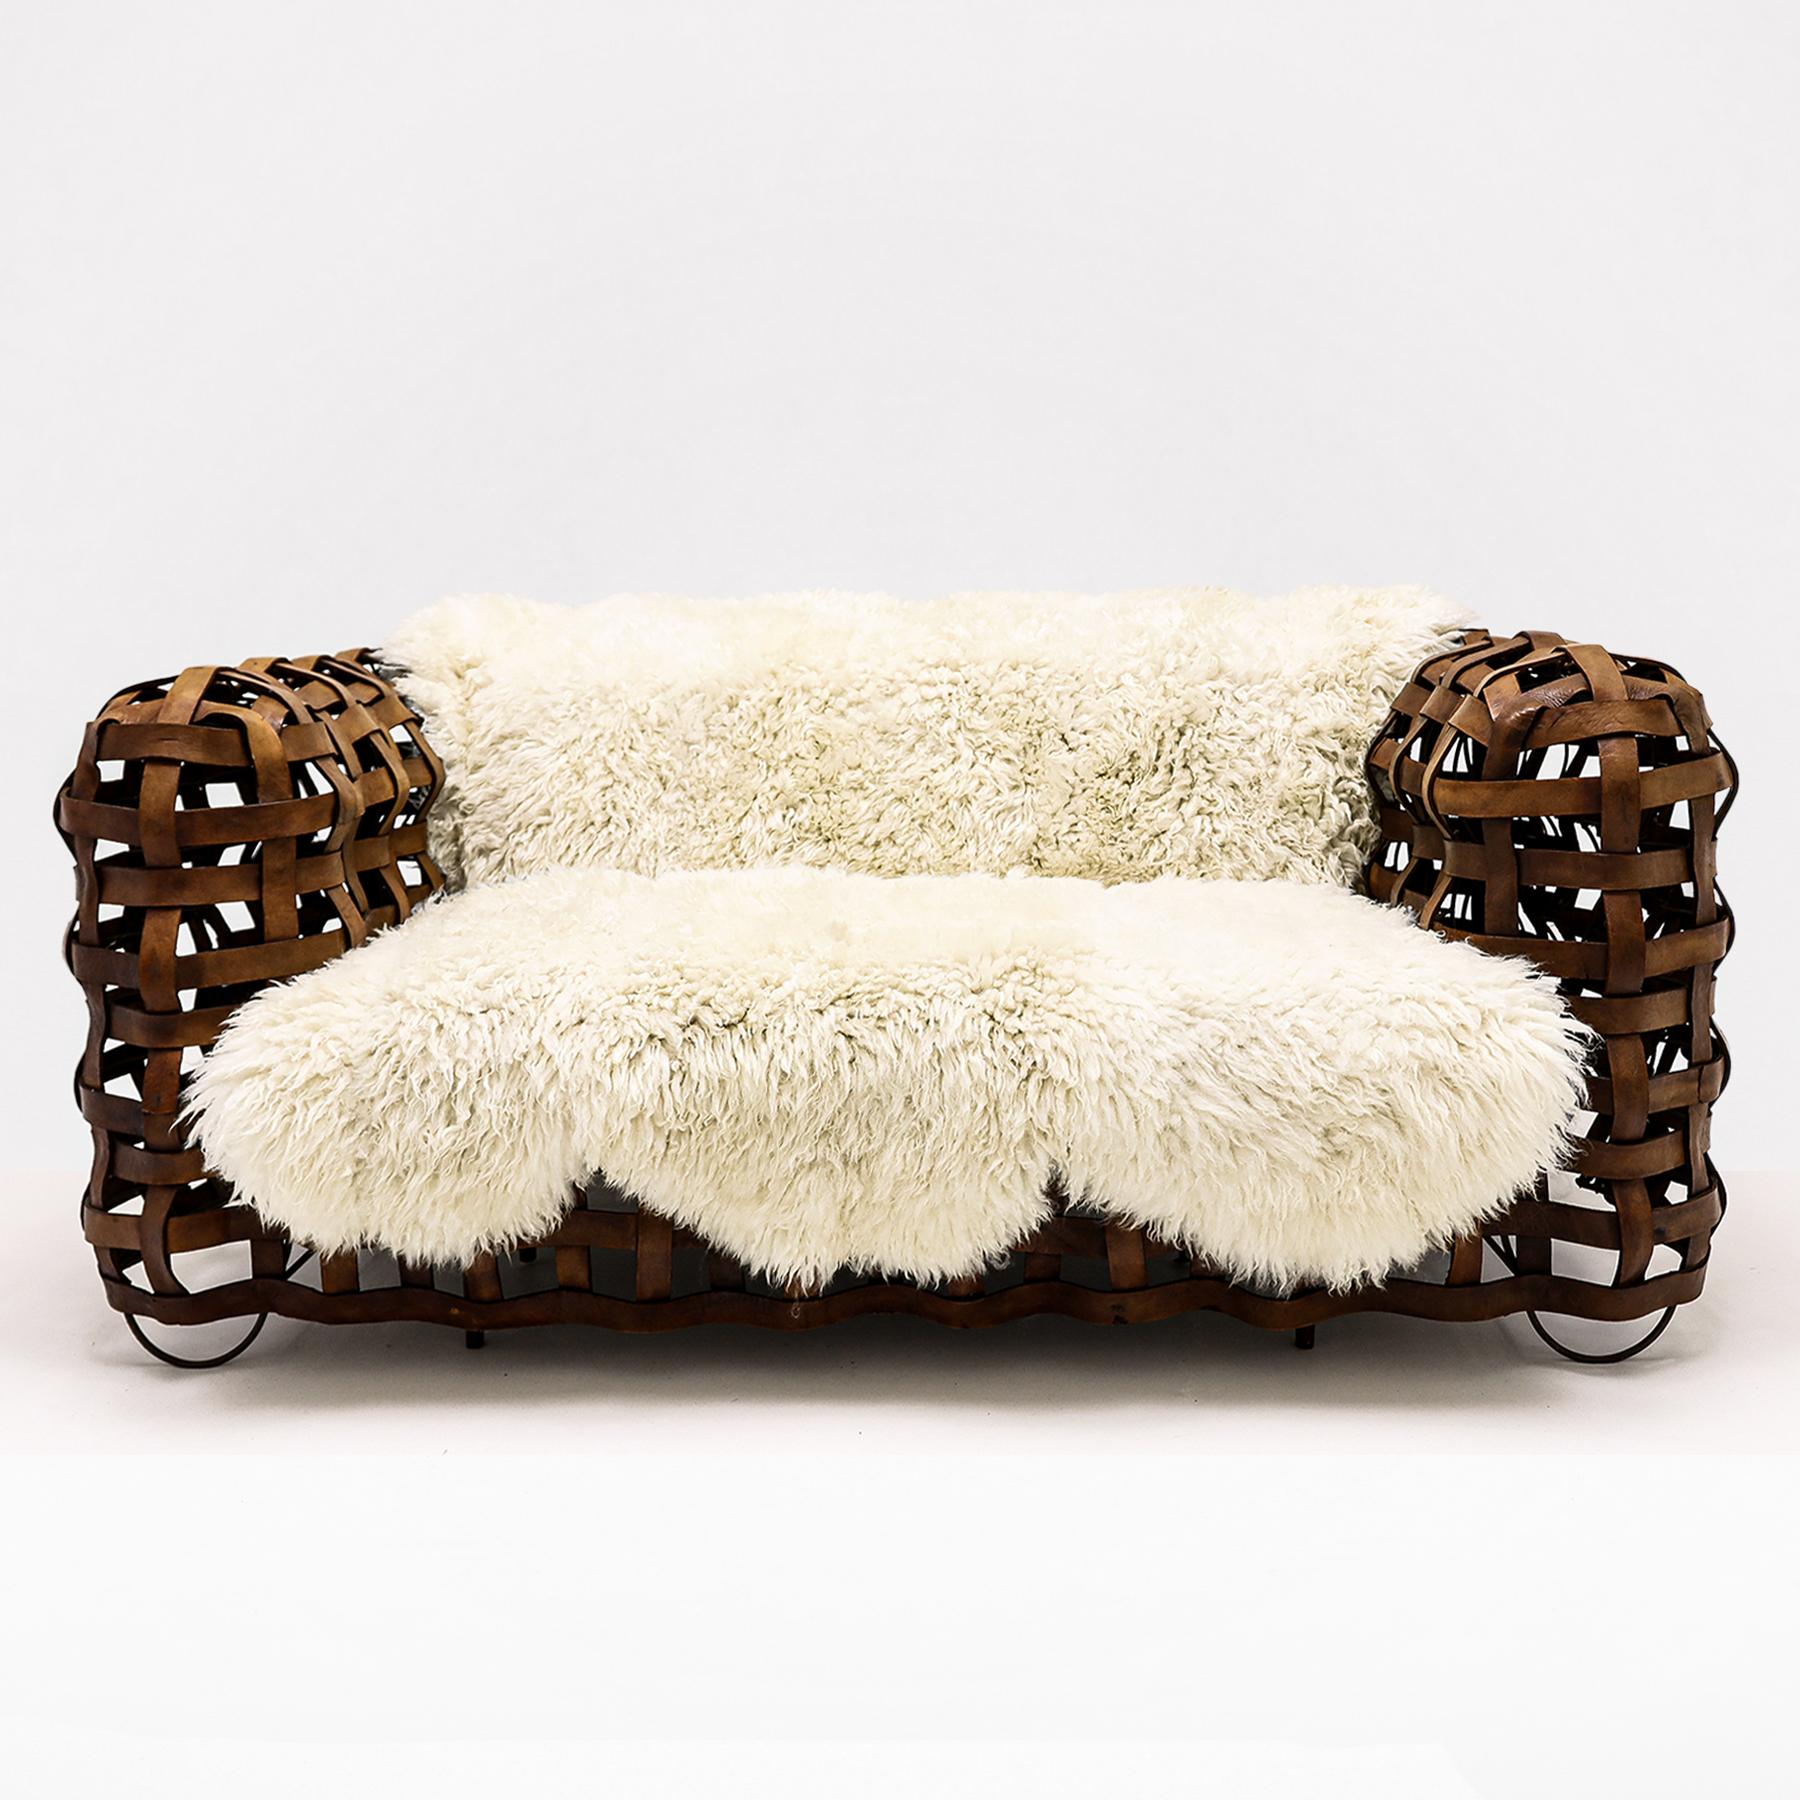 Bohemian Vintage Leather strap sofa with upholstered seat and bespoke sheepskin throw